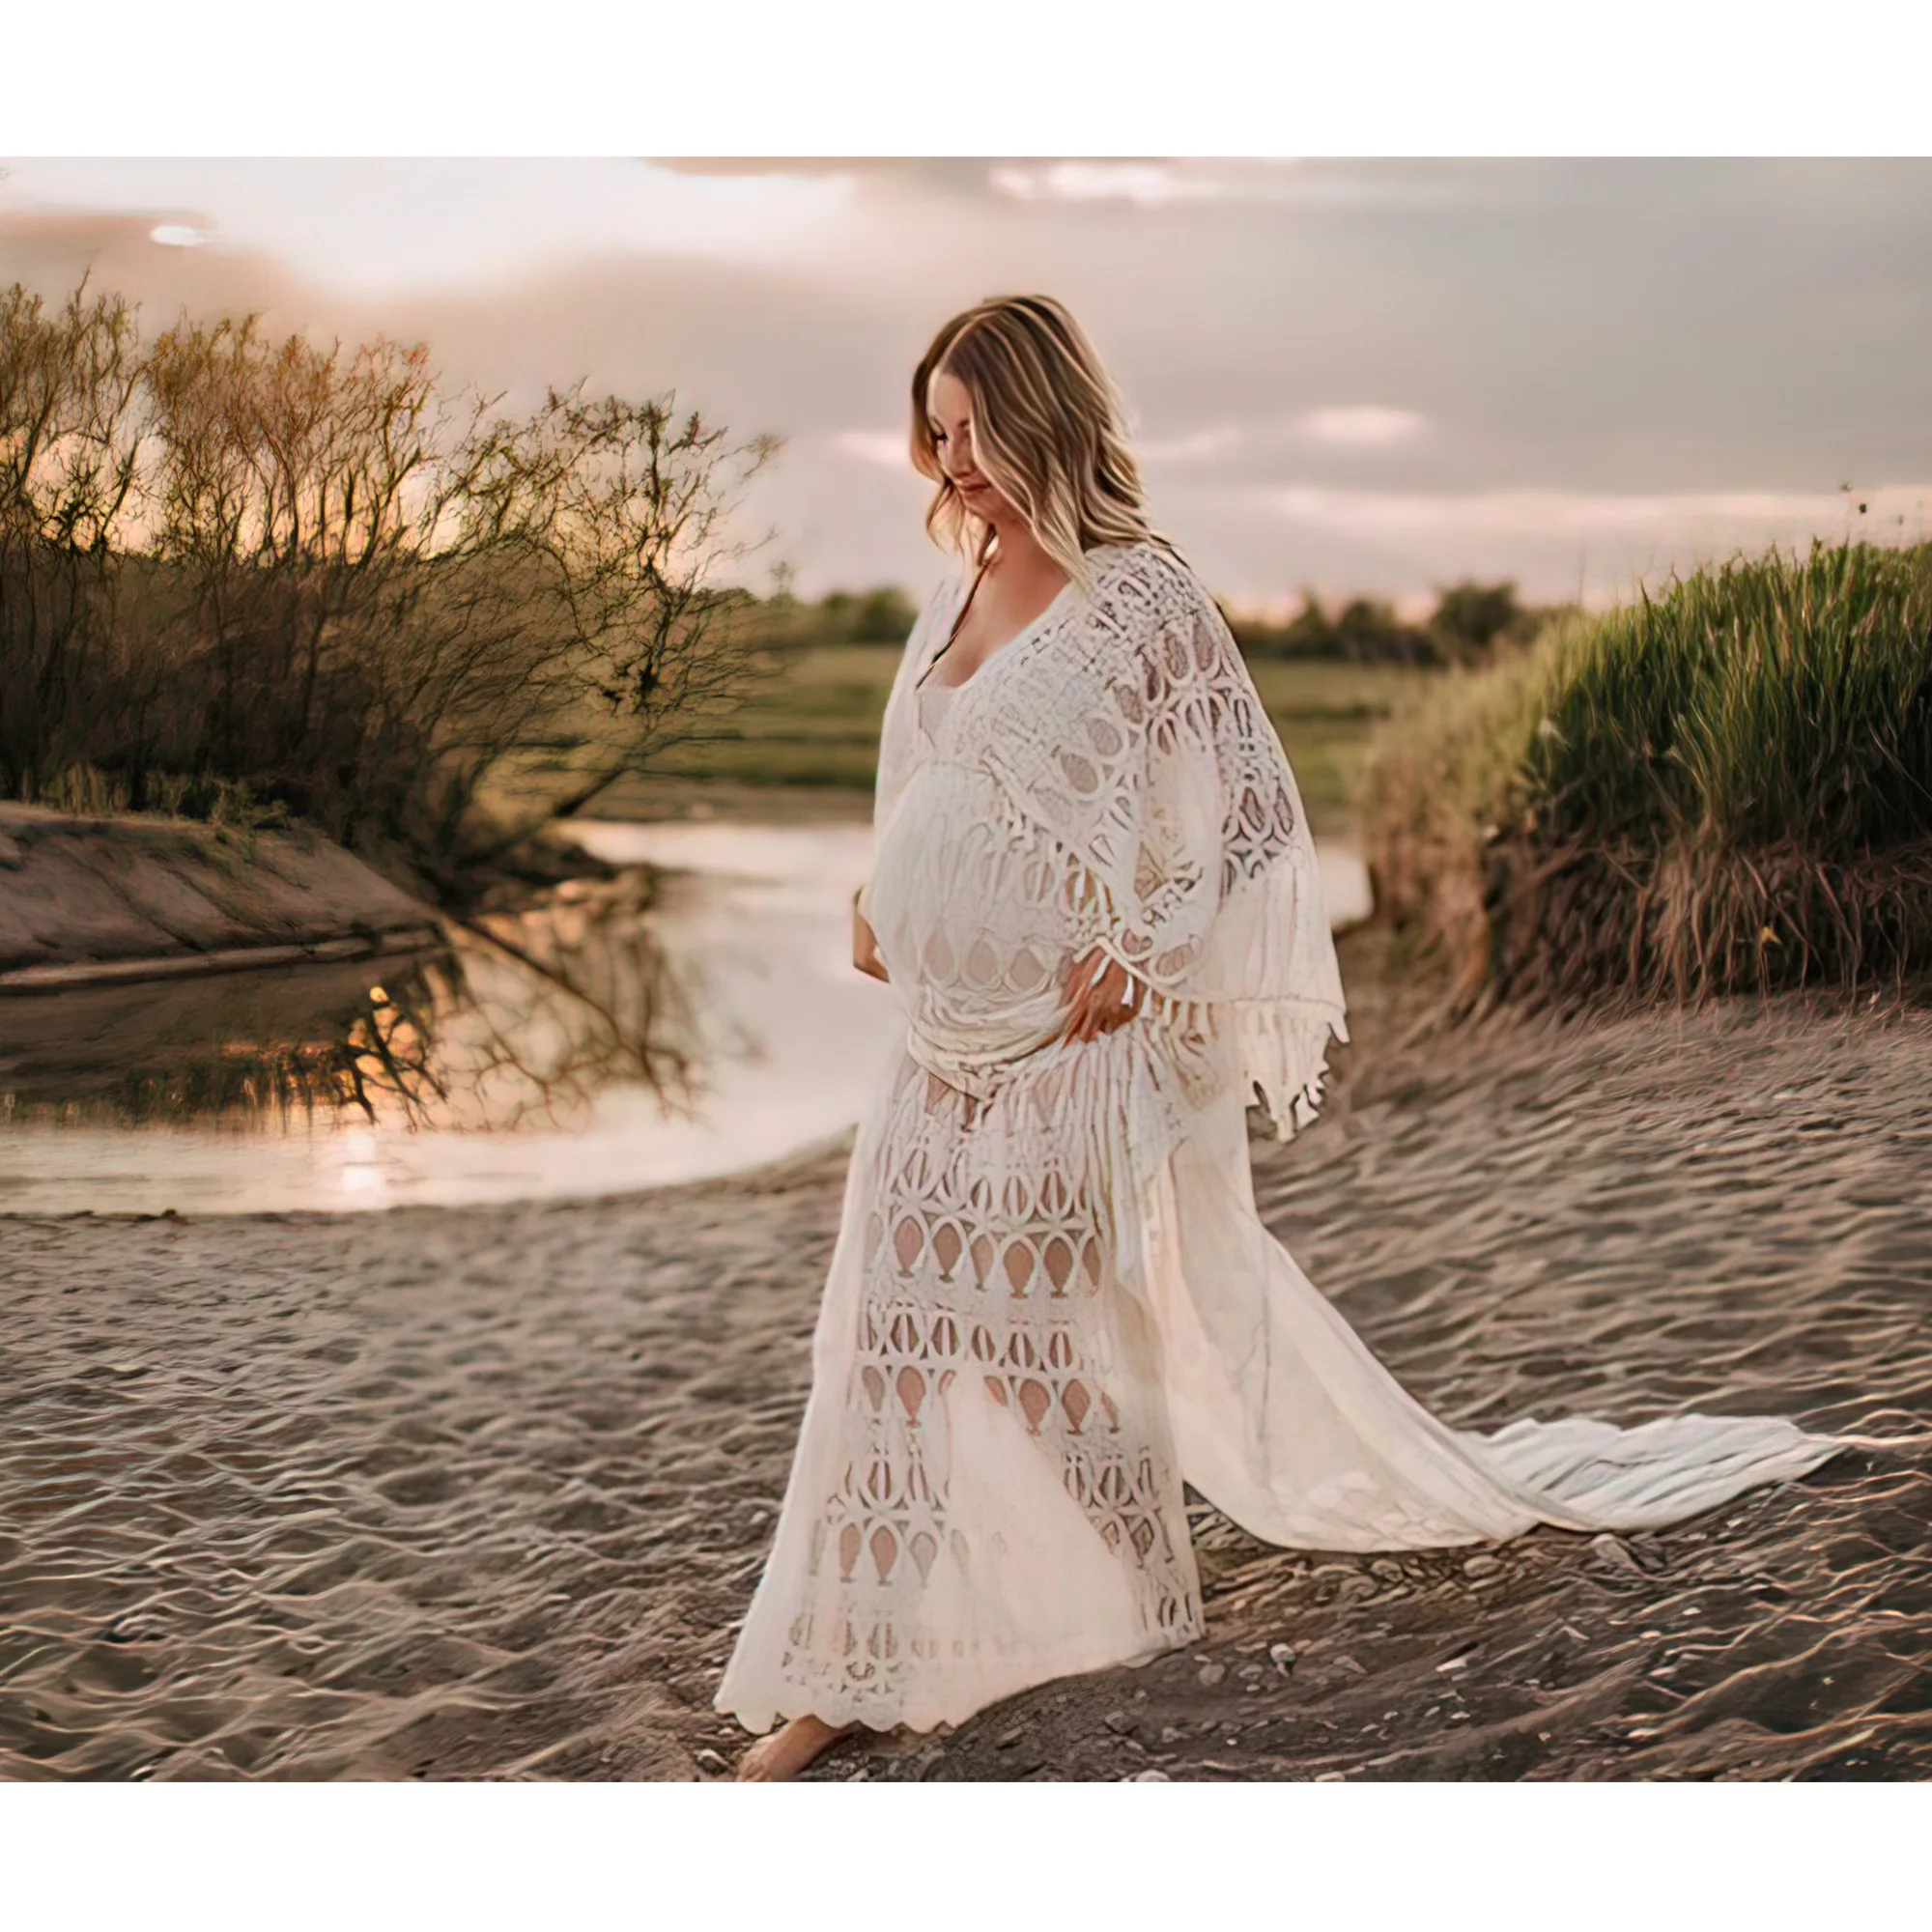 Don&Judy Baby Shower Maternity Photography Boho Dress Maxi Long Gown Pregnancy Photo Shoot Woman Clothes Evening Party Costume enlarge